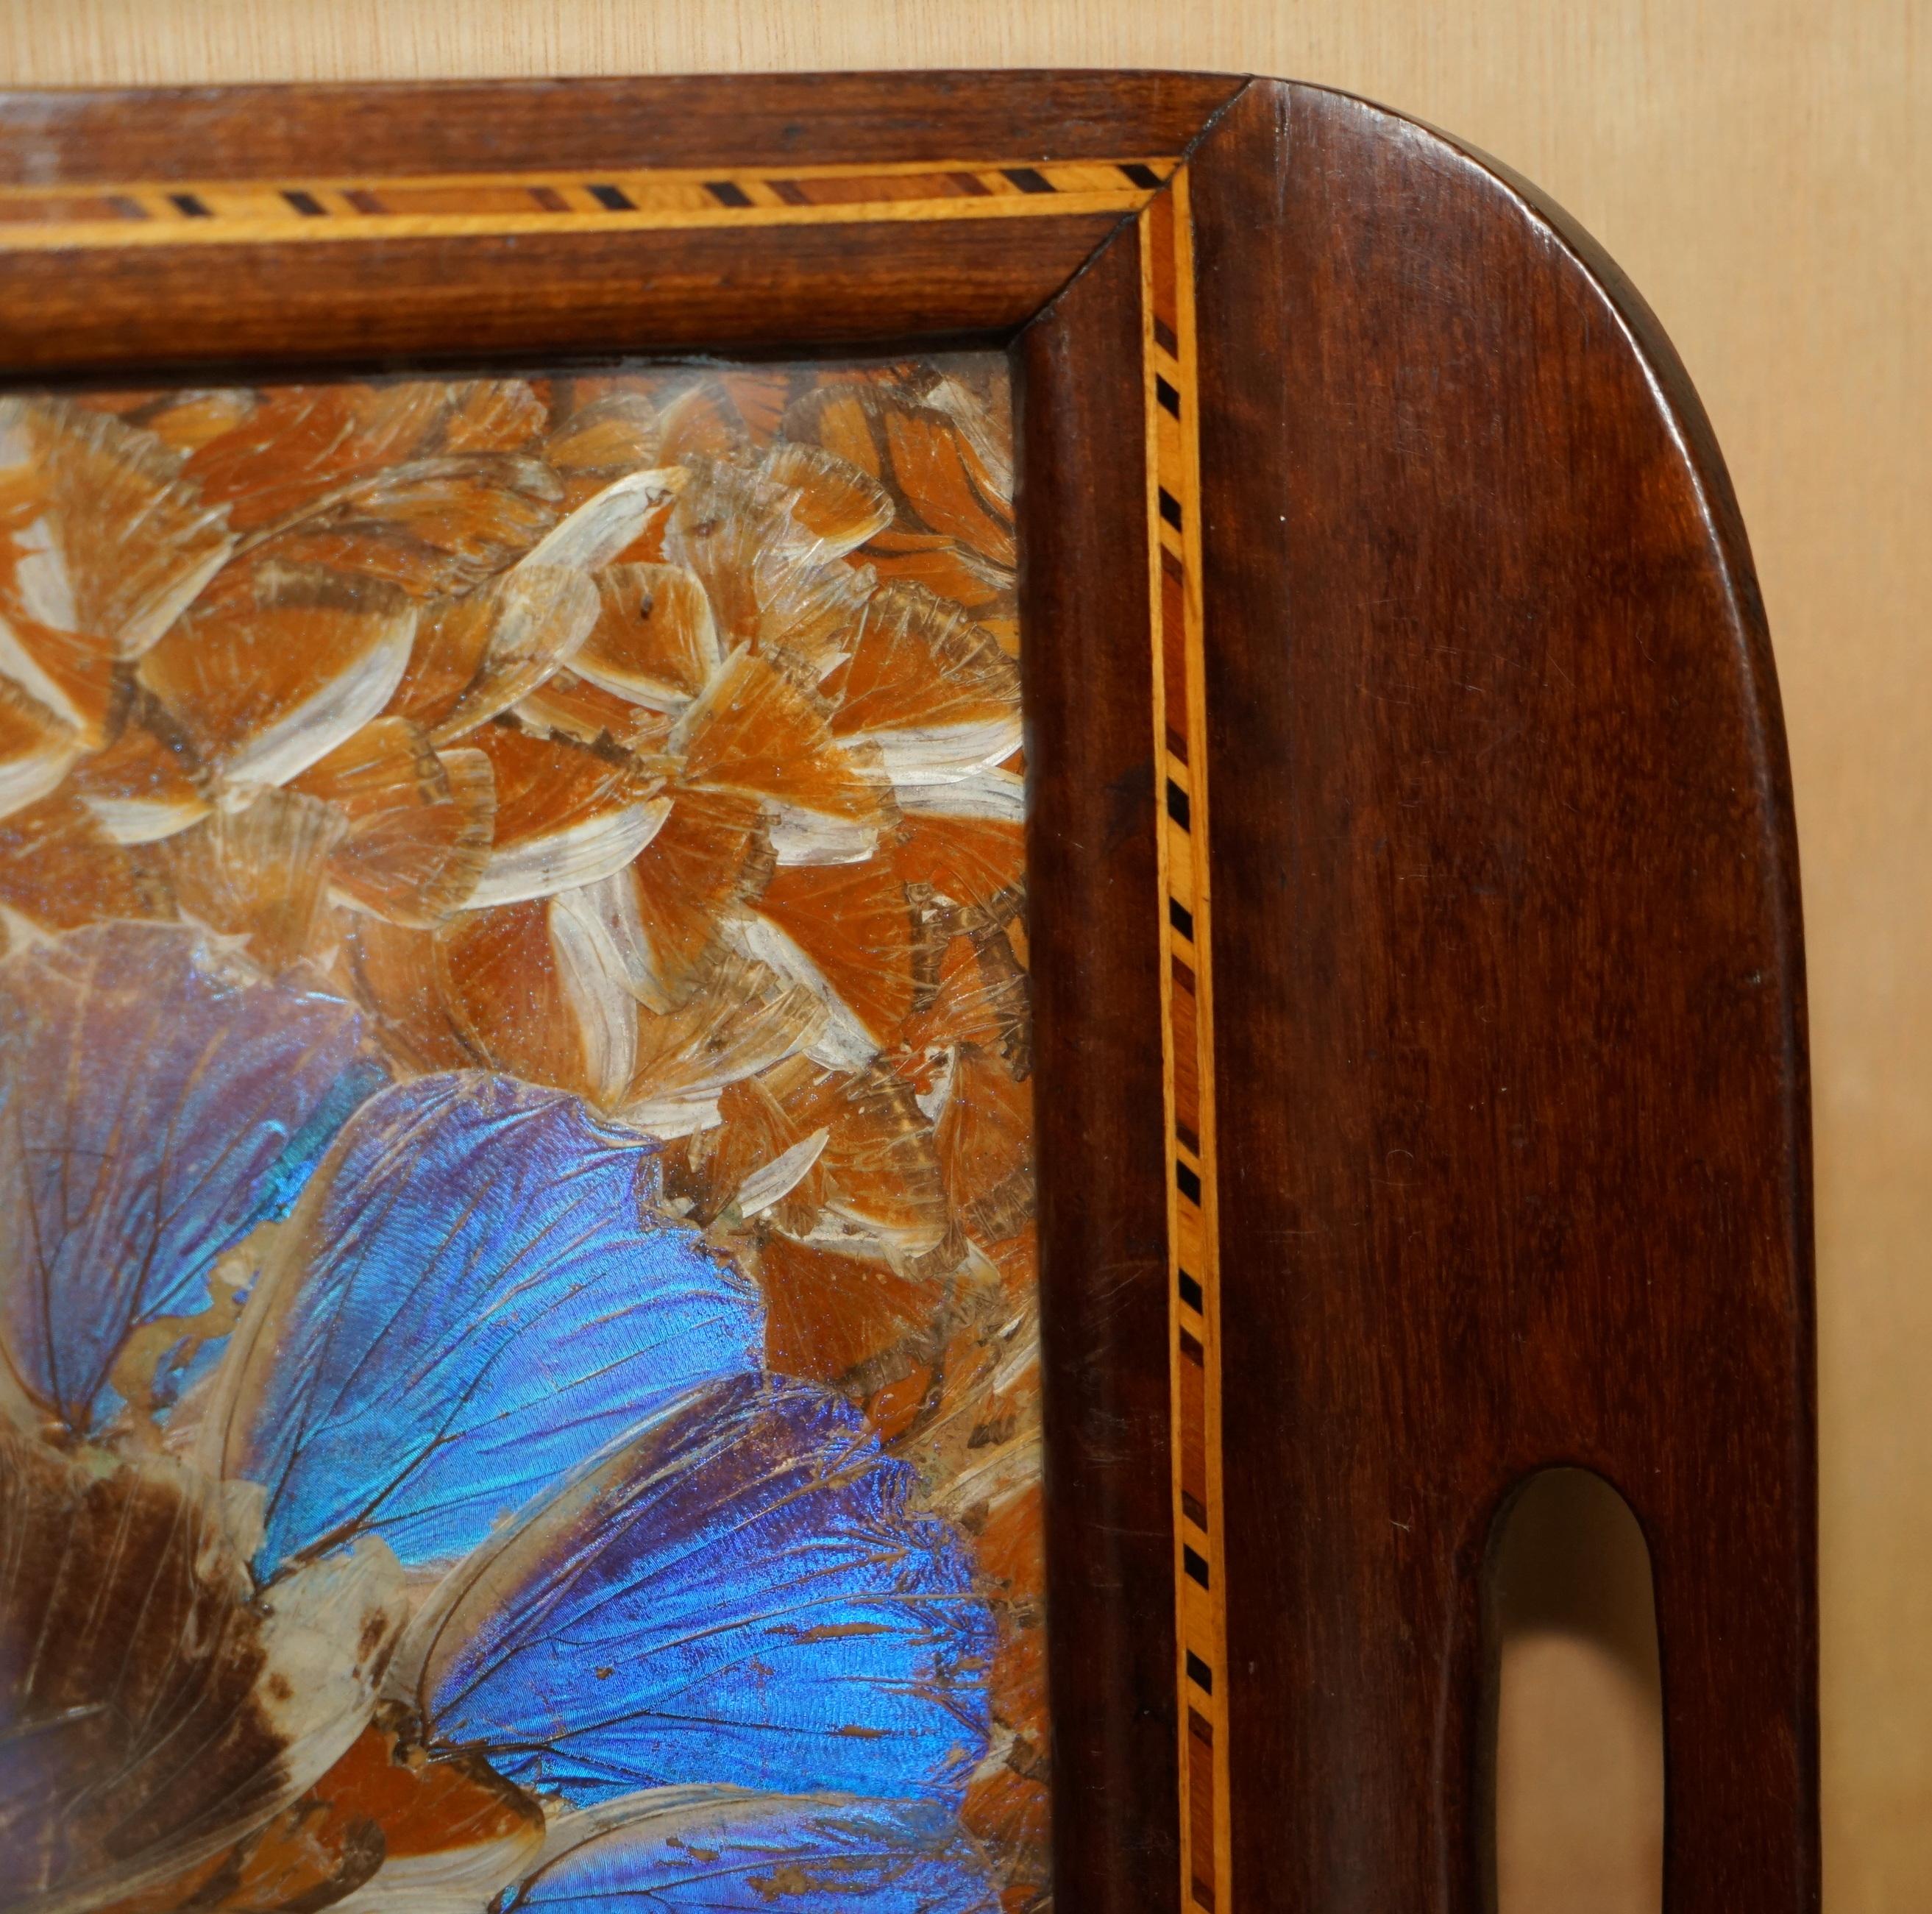 EXQUiSITE RIO DE JANEIRO BRAZILIAN HARDWOOD BUTTERFLY WING BUTLERS SERVING TRAY For Sale 8